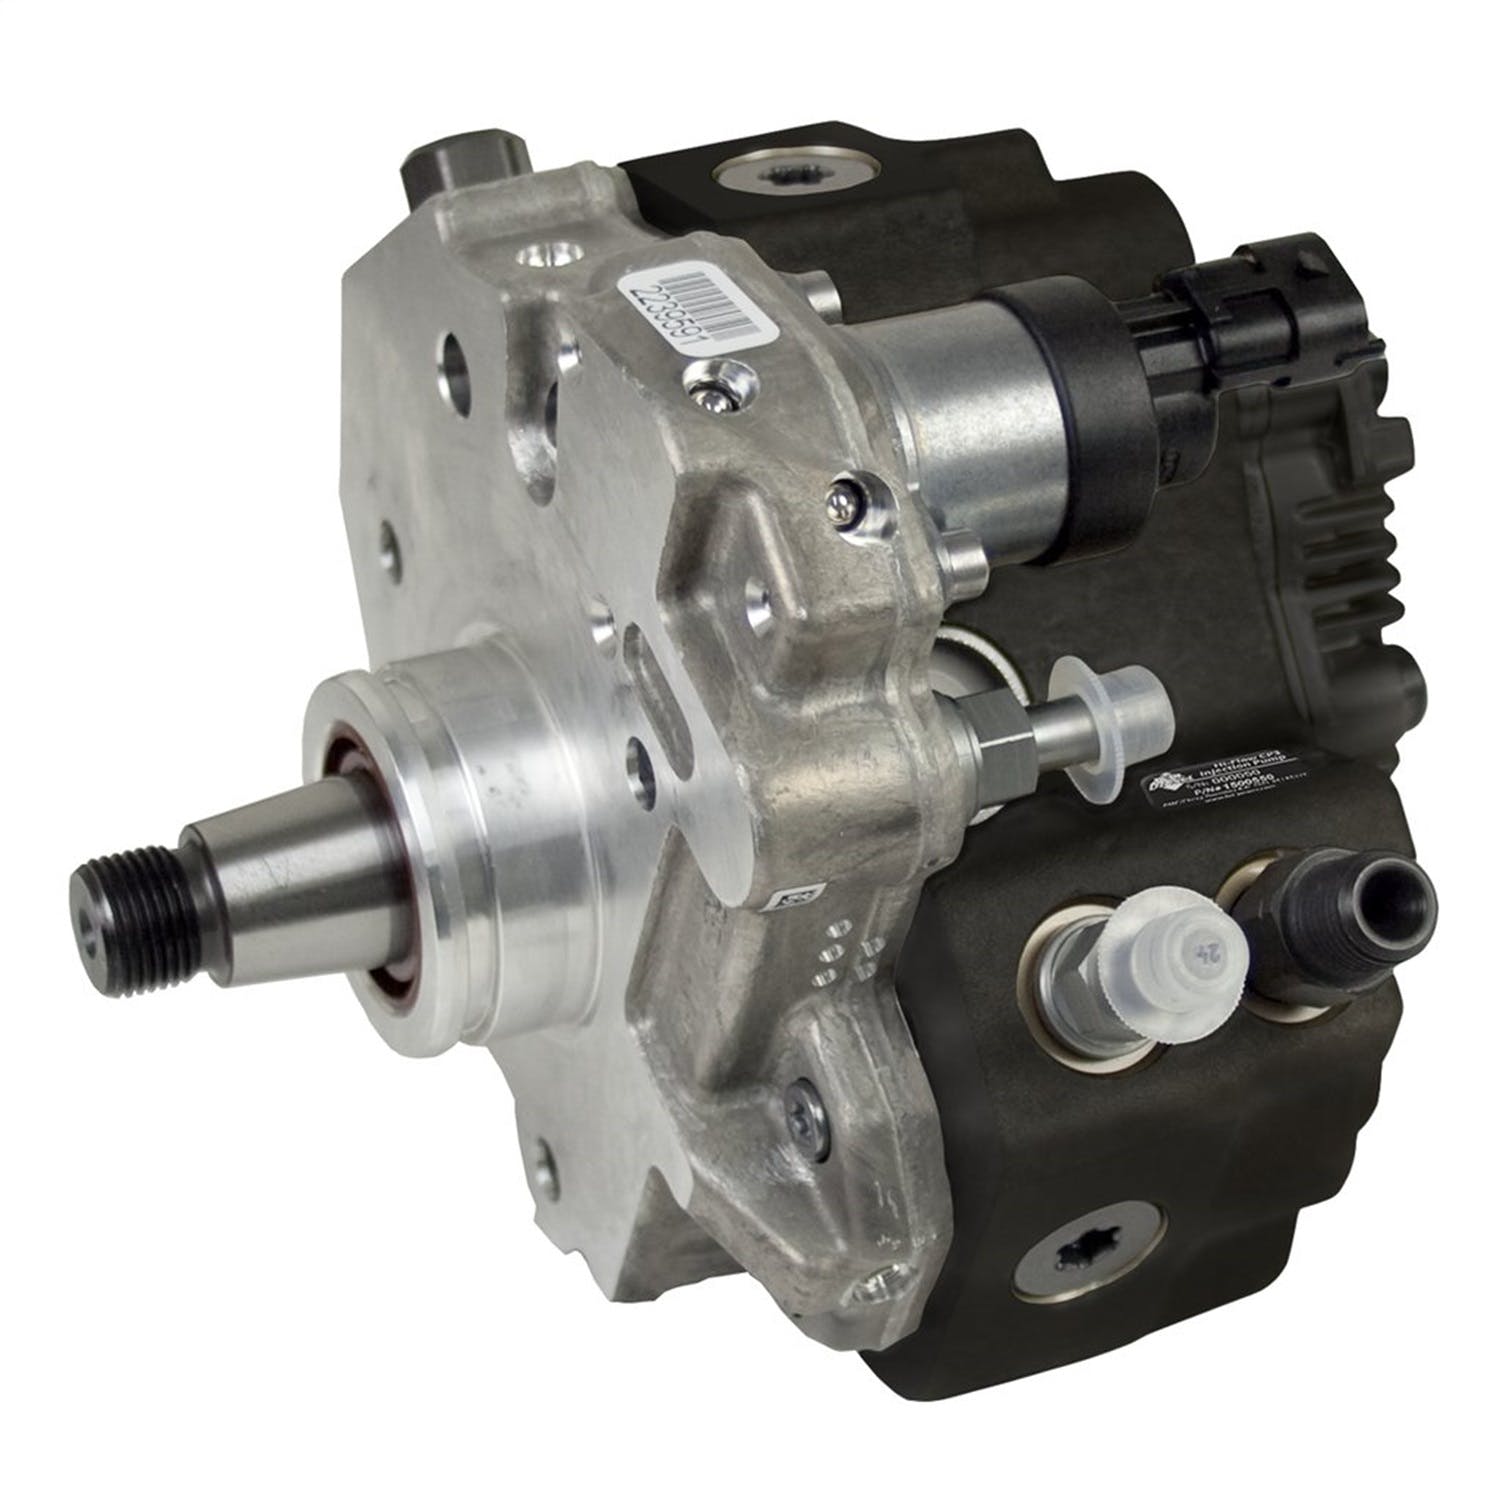 BD Diesel Performance 1050500 High Power Common Rail Injection Pump